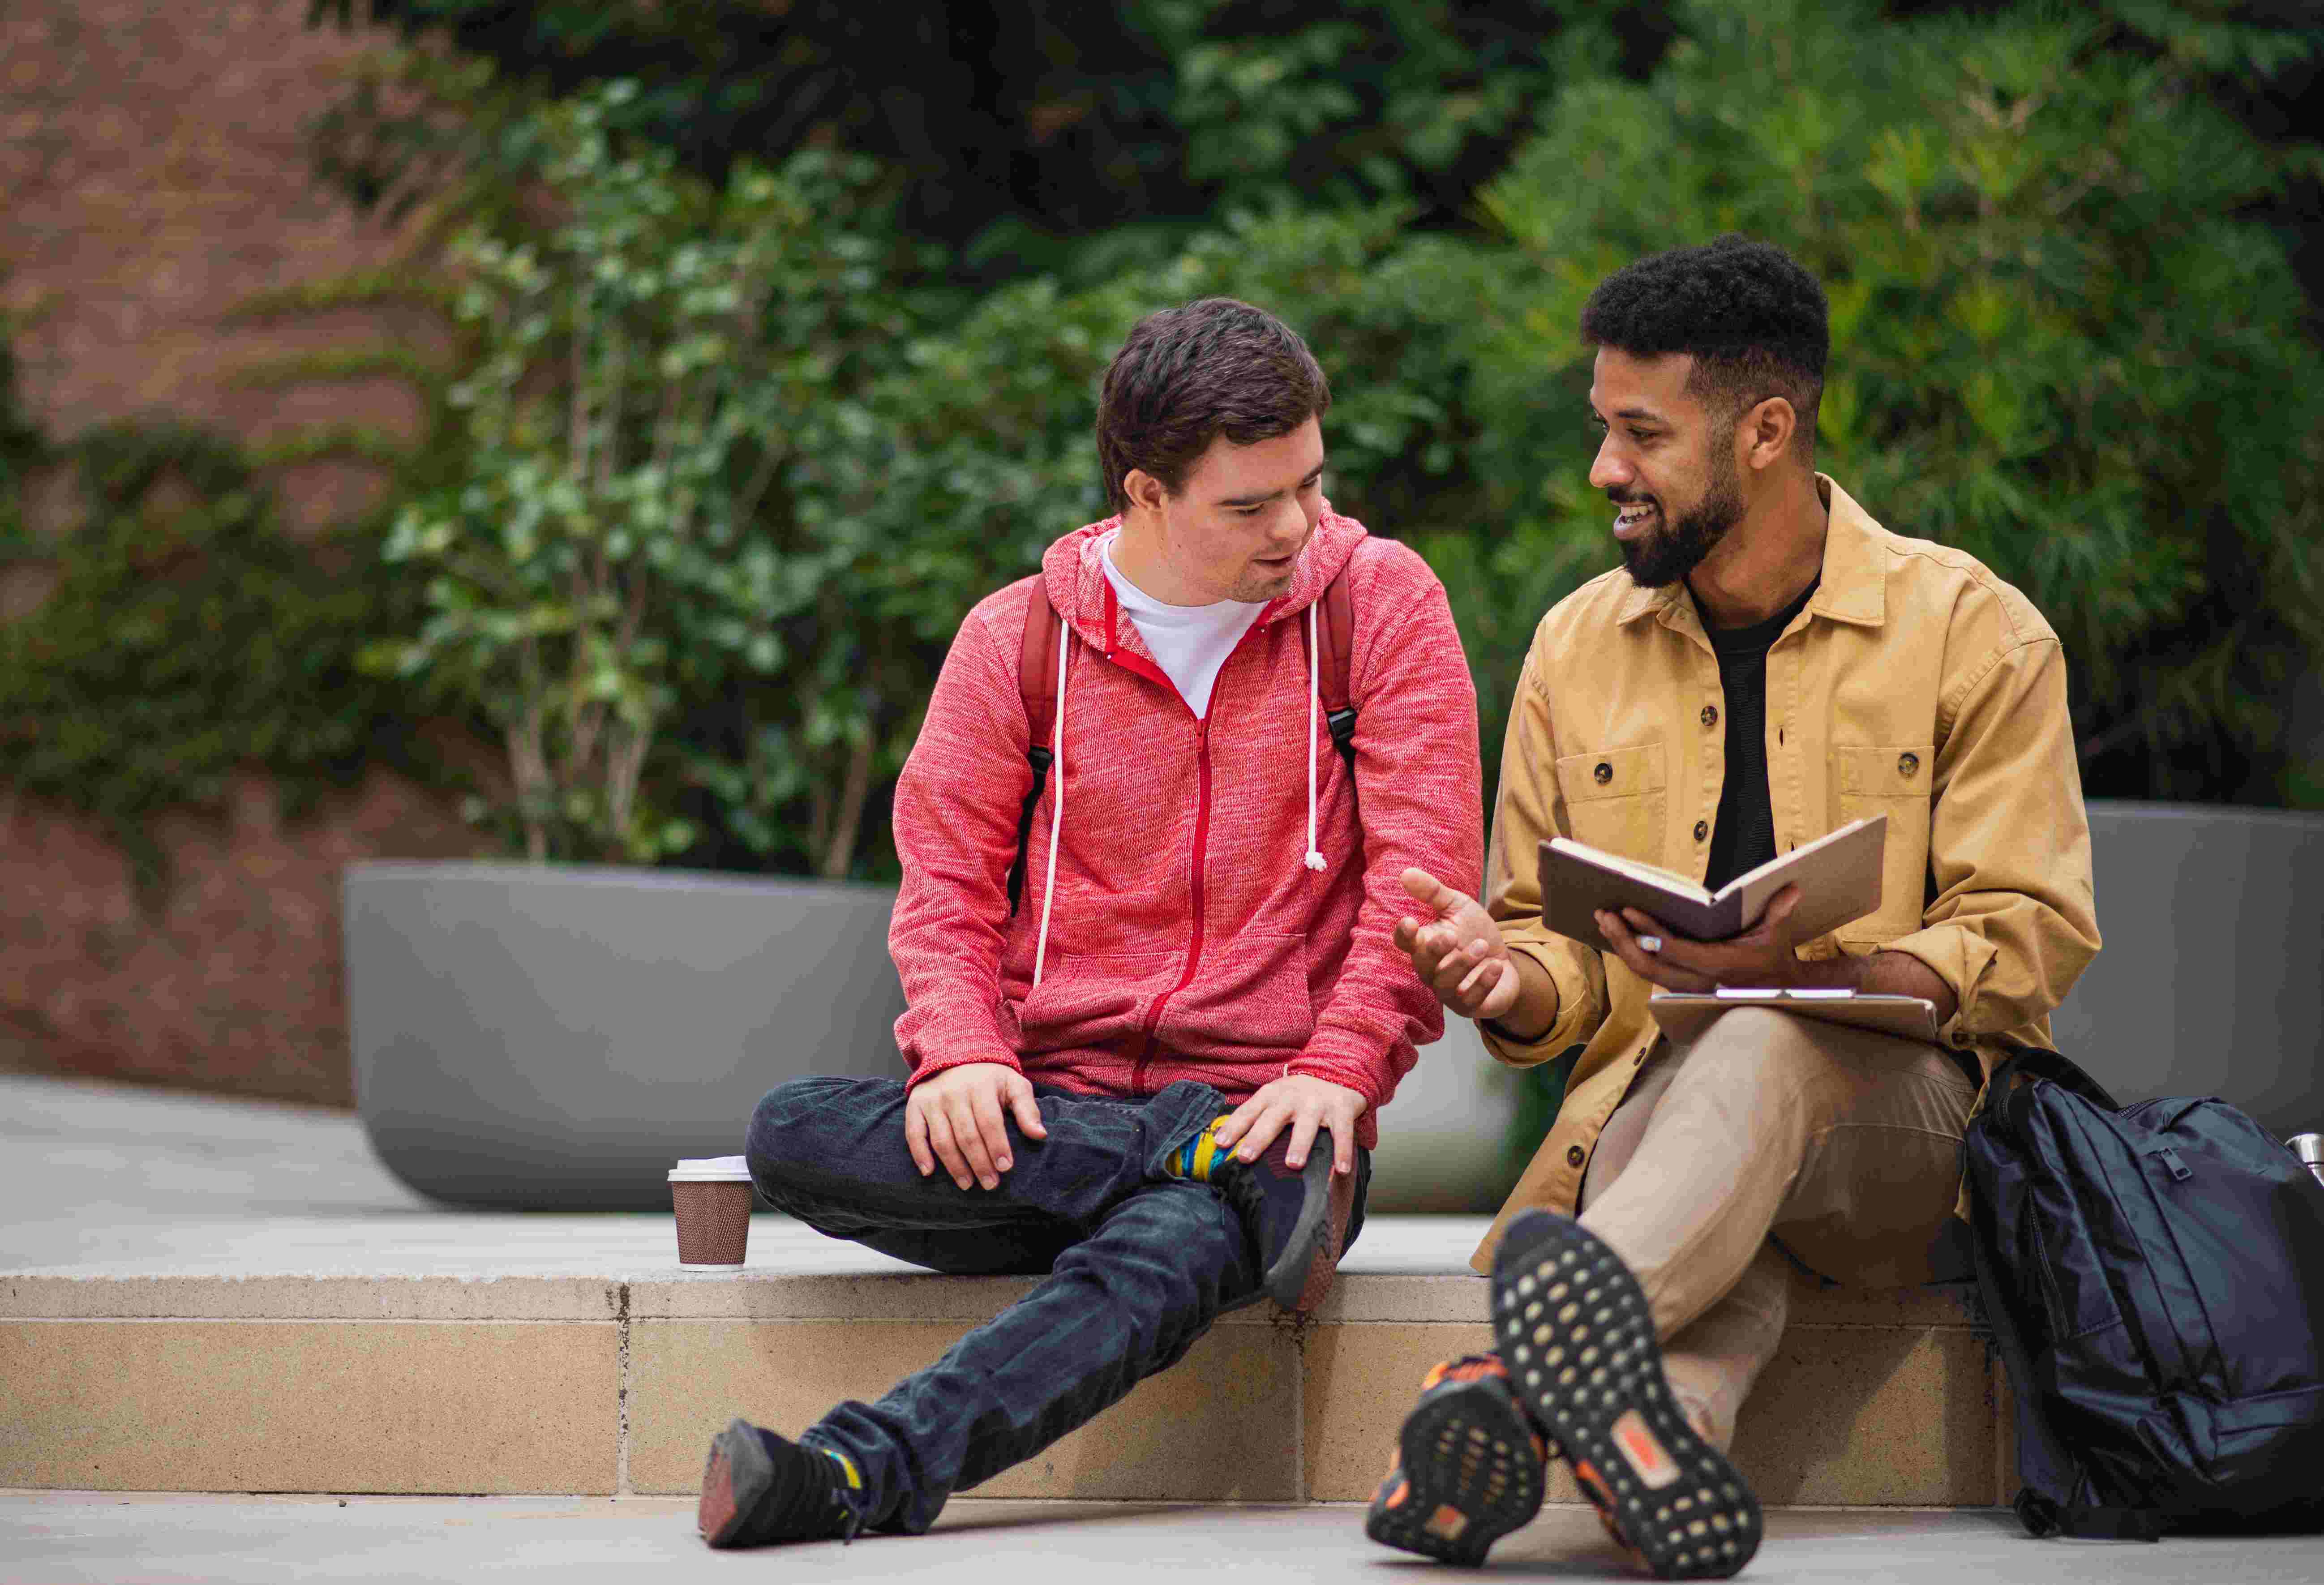 Offer personalised career advising opportunities to reduce the Quiet Quitting phenomenon. In this image, a happy young man with Down syndrome and mentor friend sitting and chatting outdoors